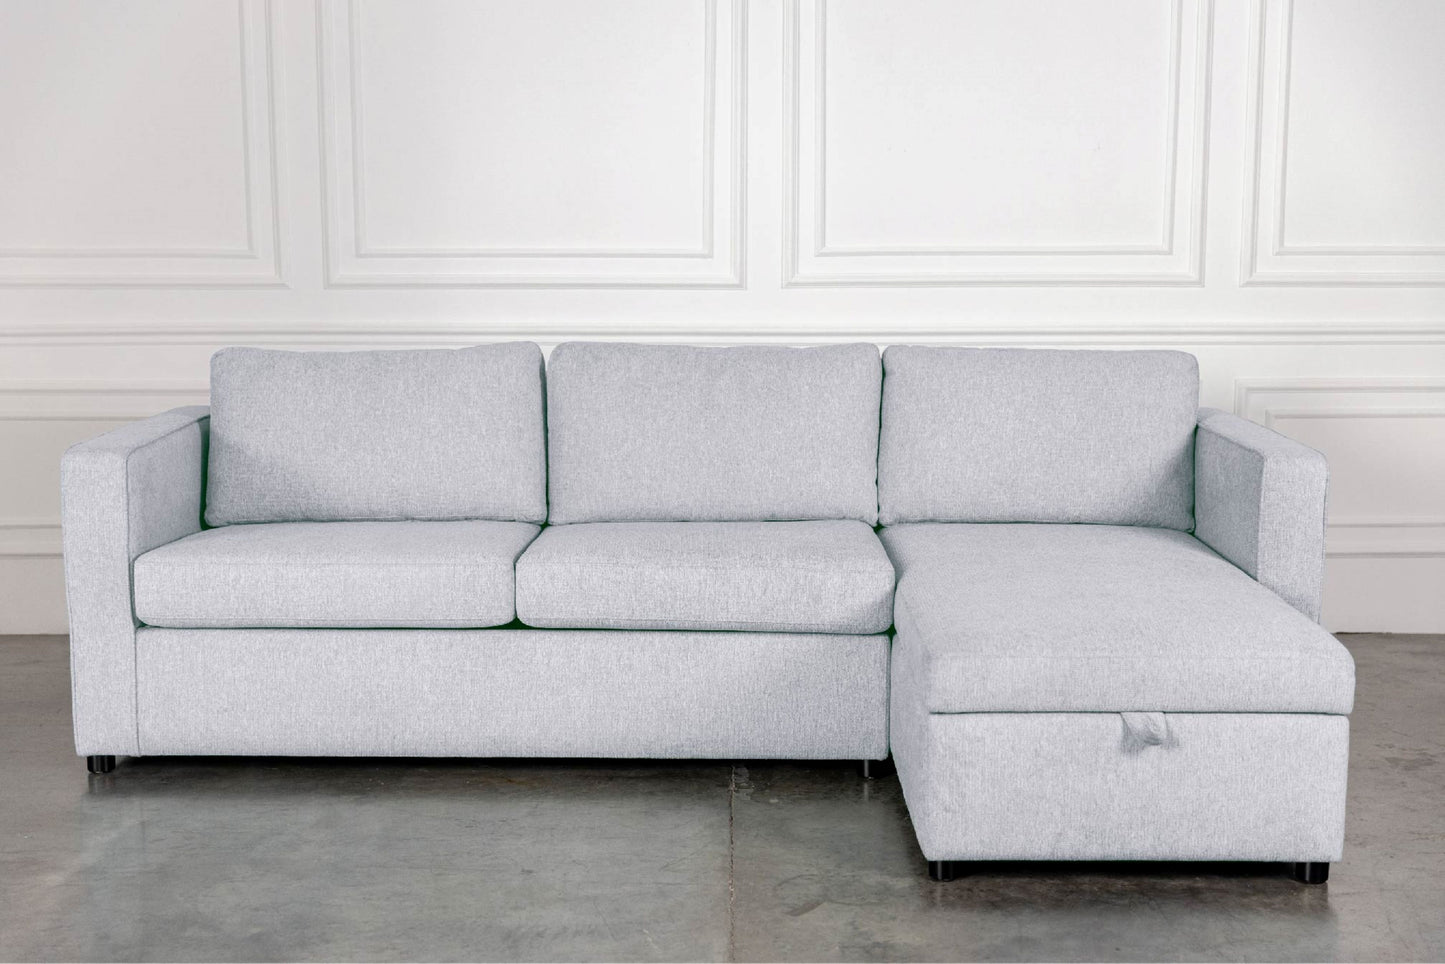 Light grey 3-seater l-shape comeover sofa bed with storage